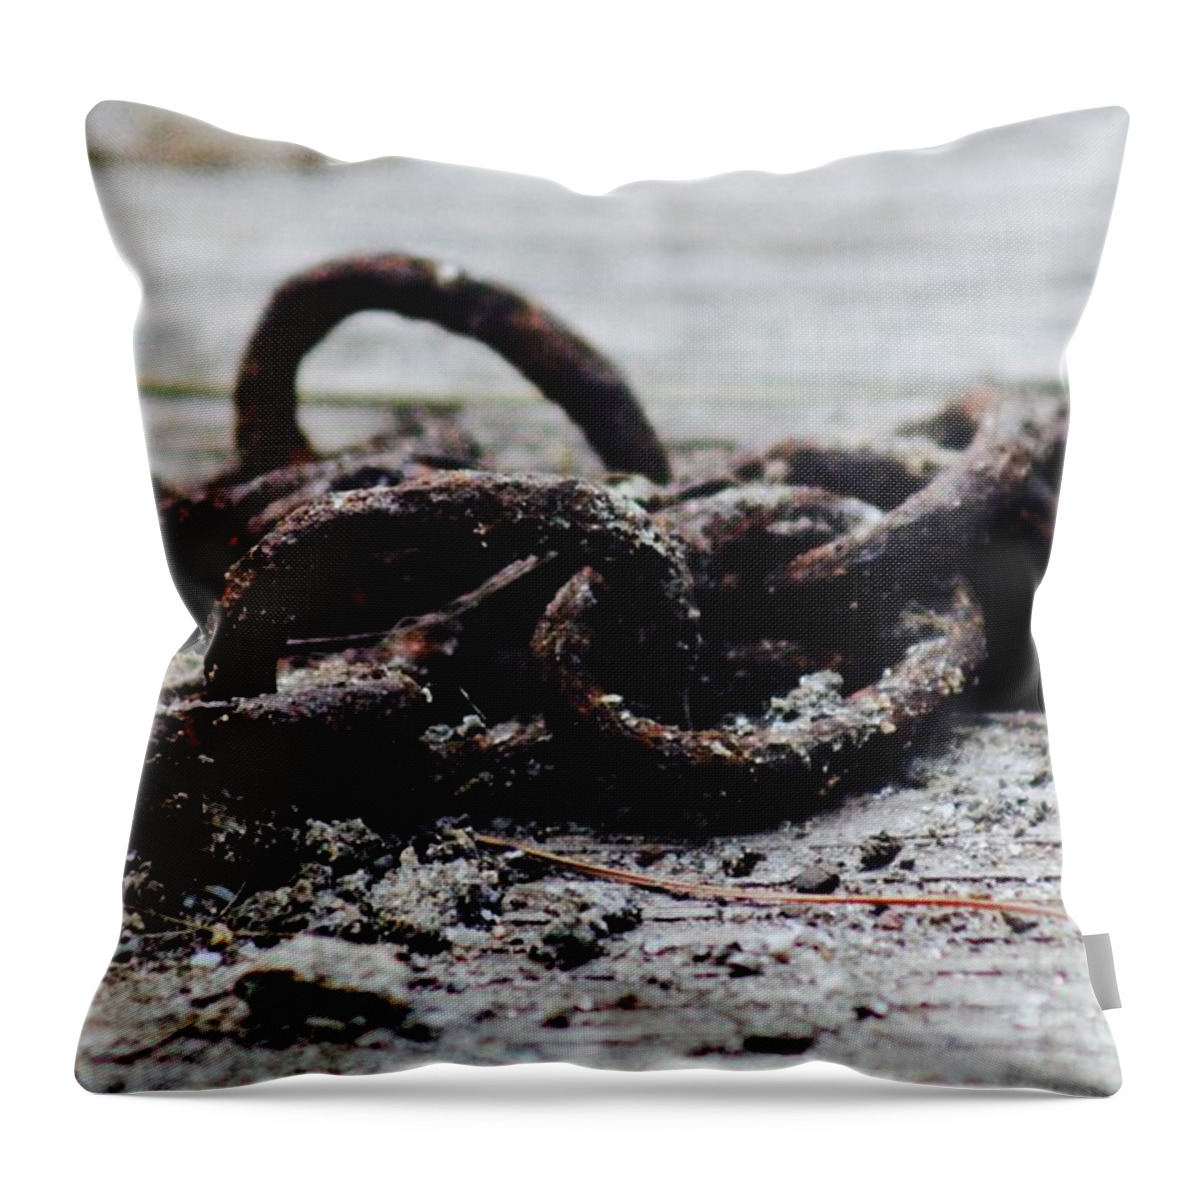 Rust Throw Pillow featuring the photograph Rusty Chain by Deena Withycombe